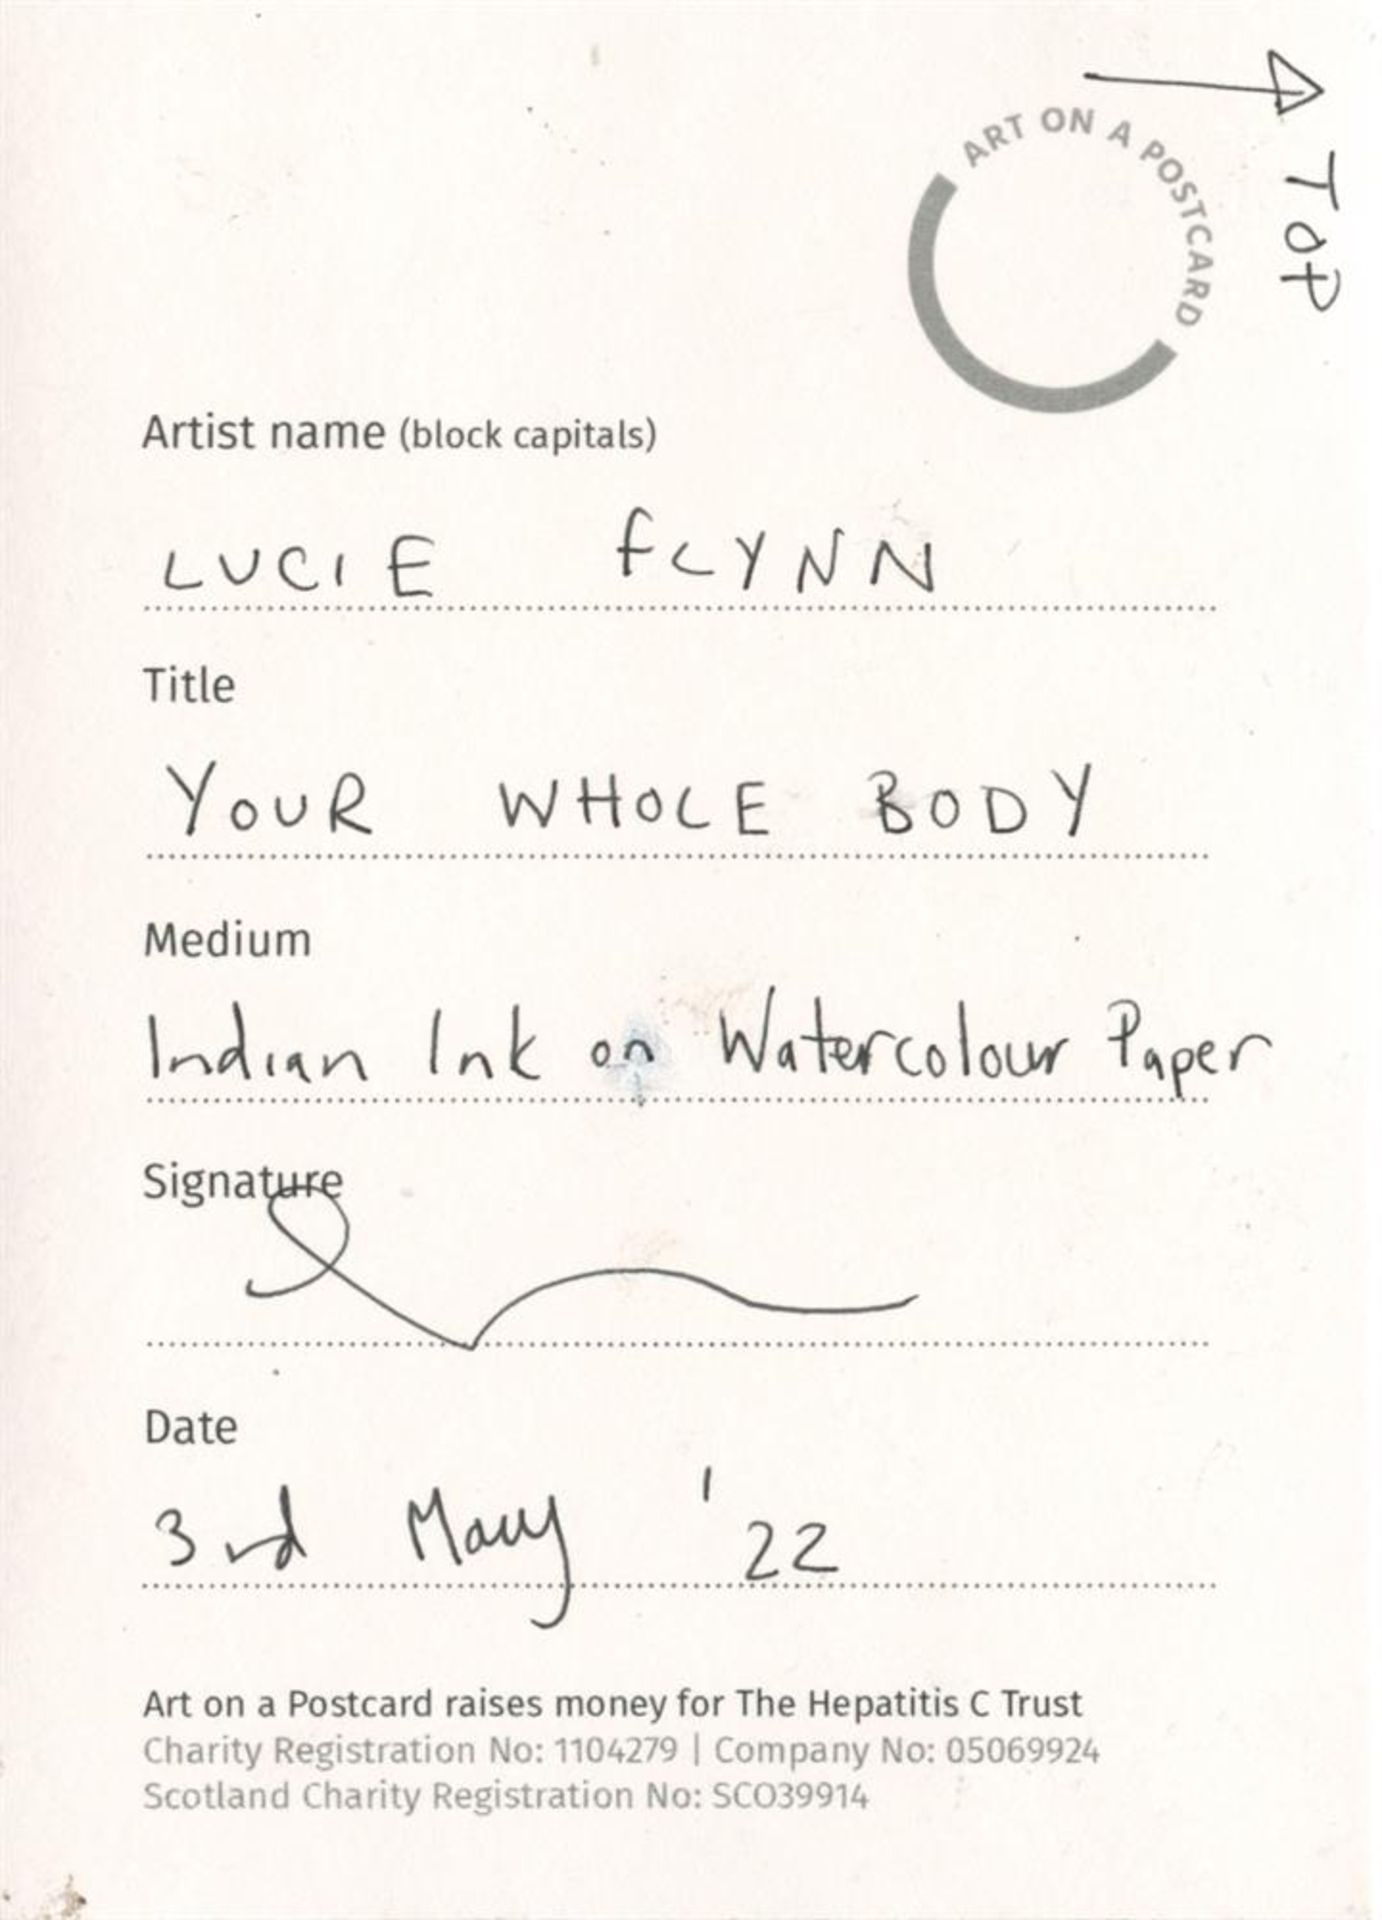 Lucie Flynn, Your Whole Body, 2022 - Image 2 of 3